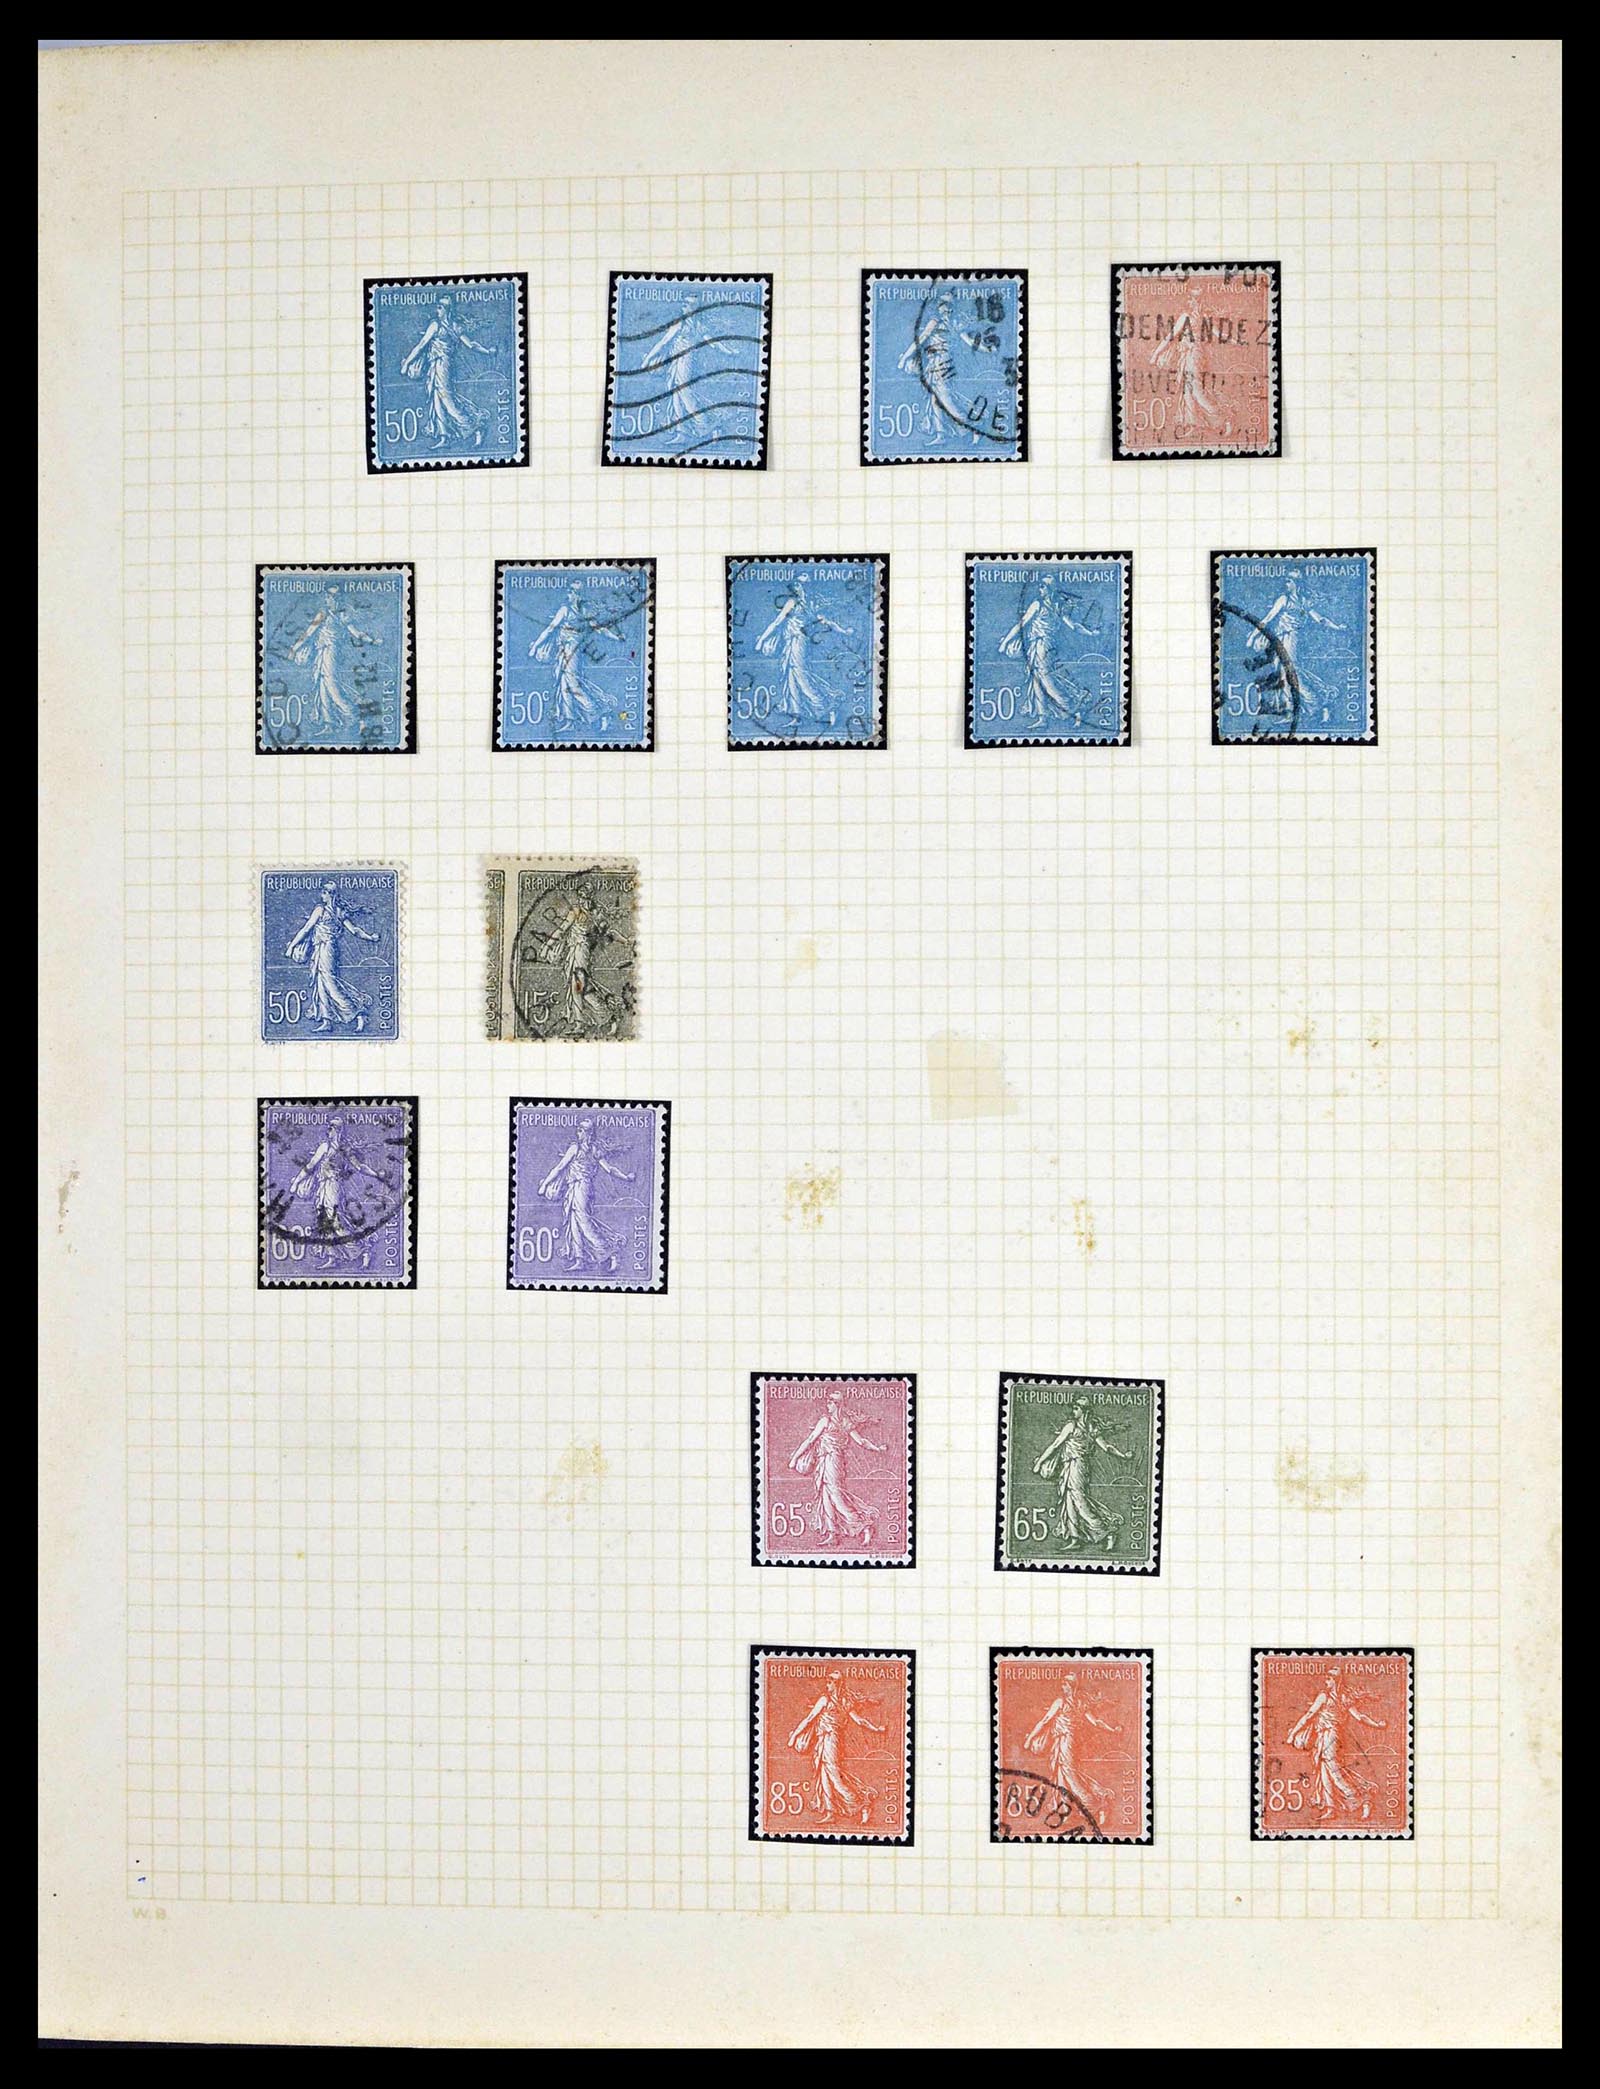 39329 0001 - Stamp collection 39329 France Semeuse.